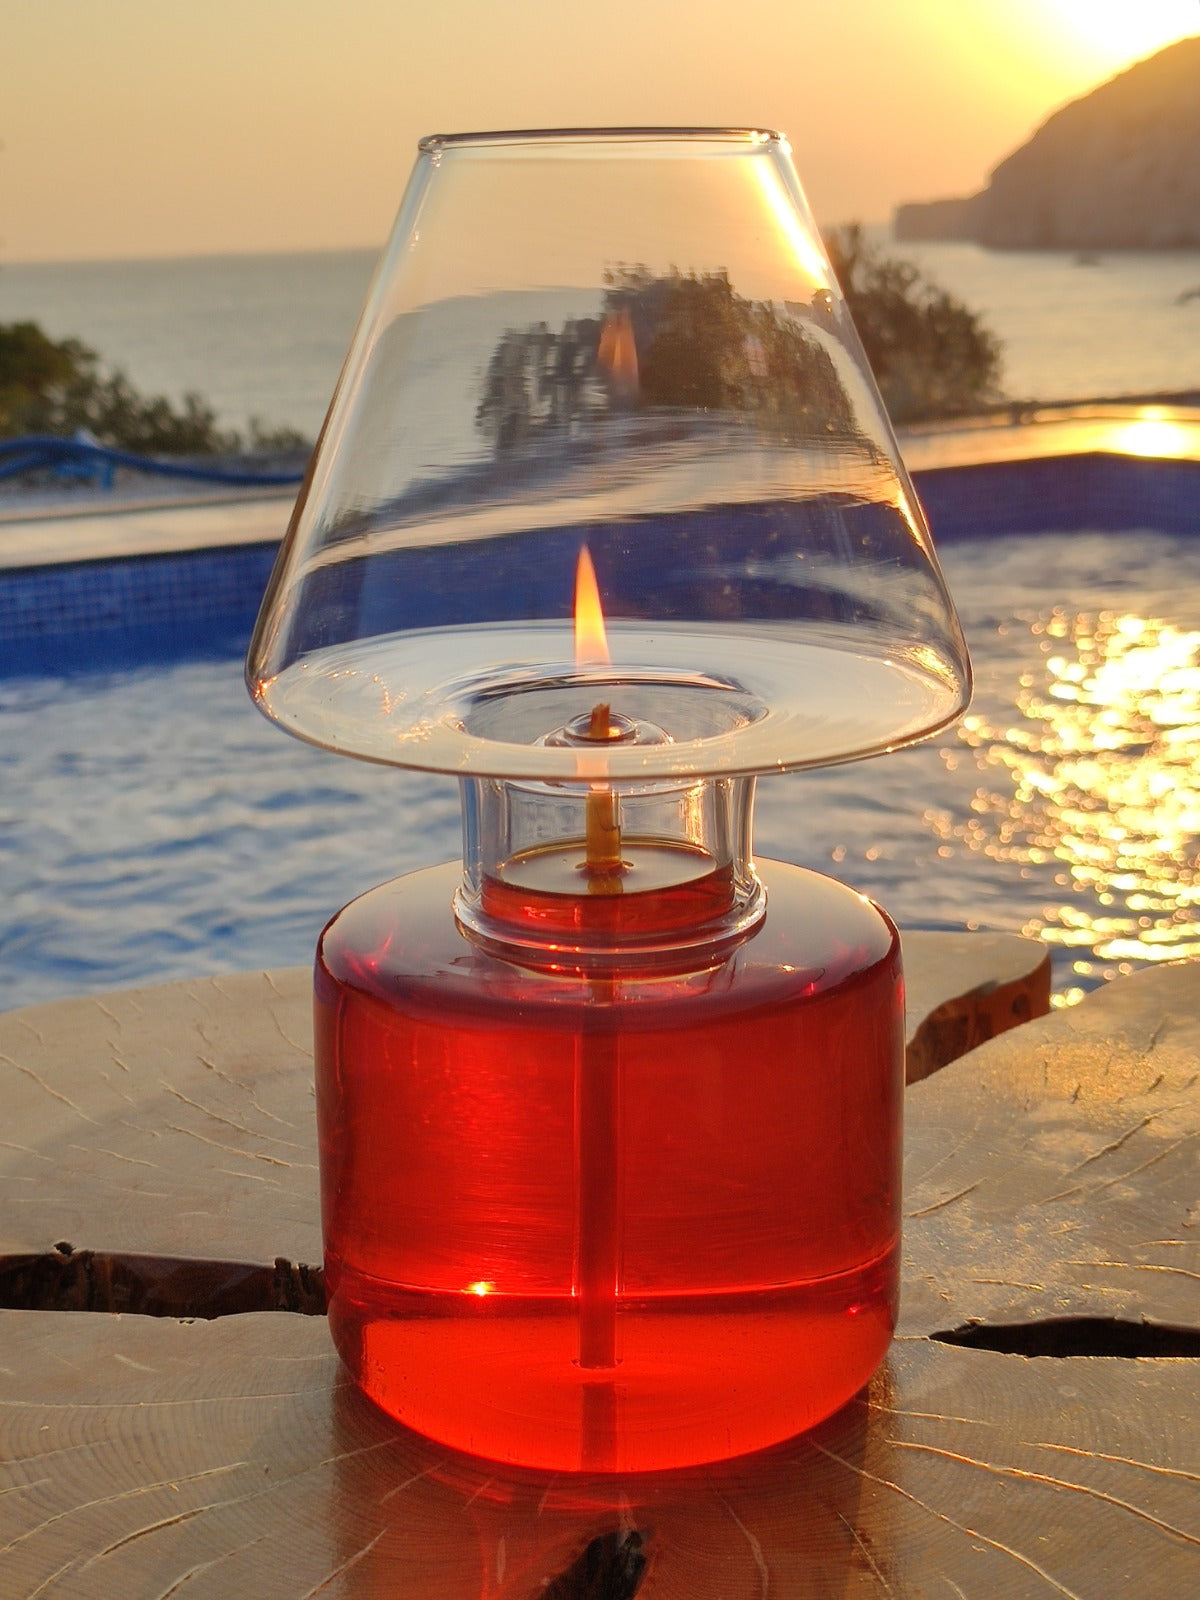 Quem Moss Handmade Glass Oil Lampshade with Glass Wick for Indoor and Outdoor, Modern Glass Decor for Home and Office.